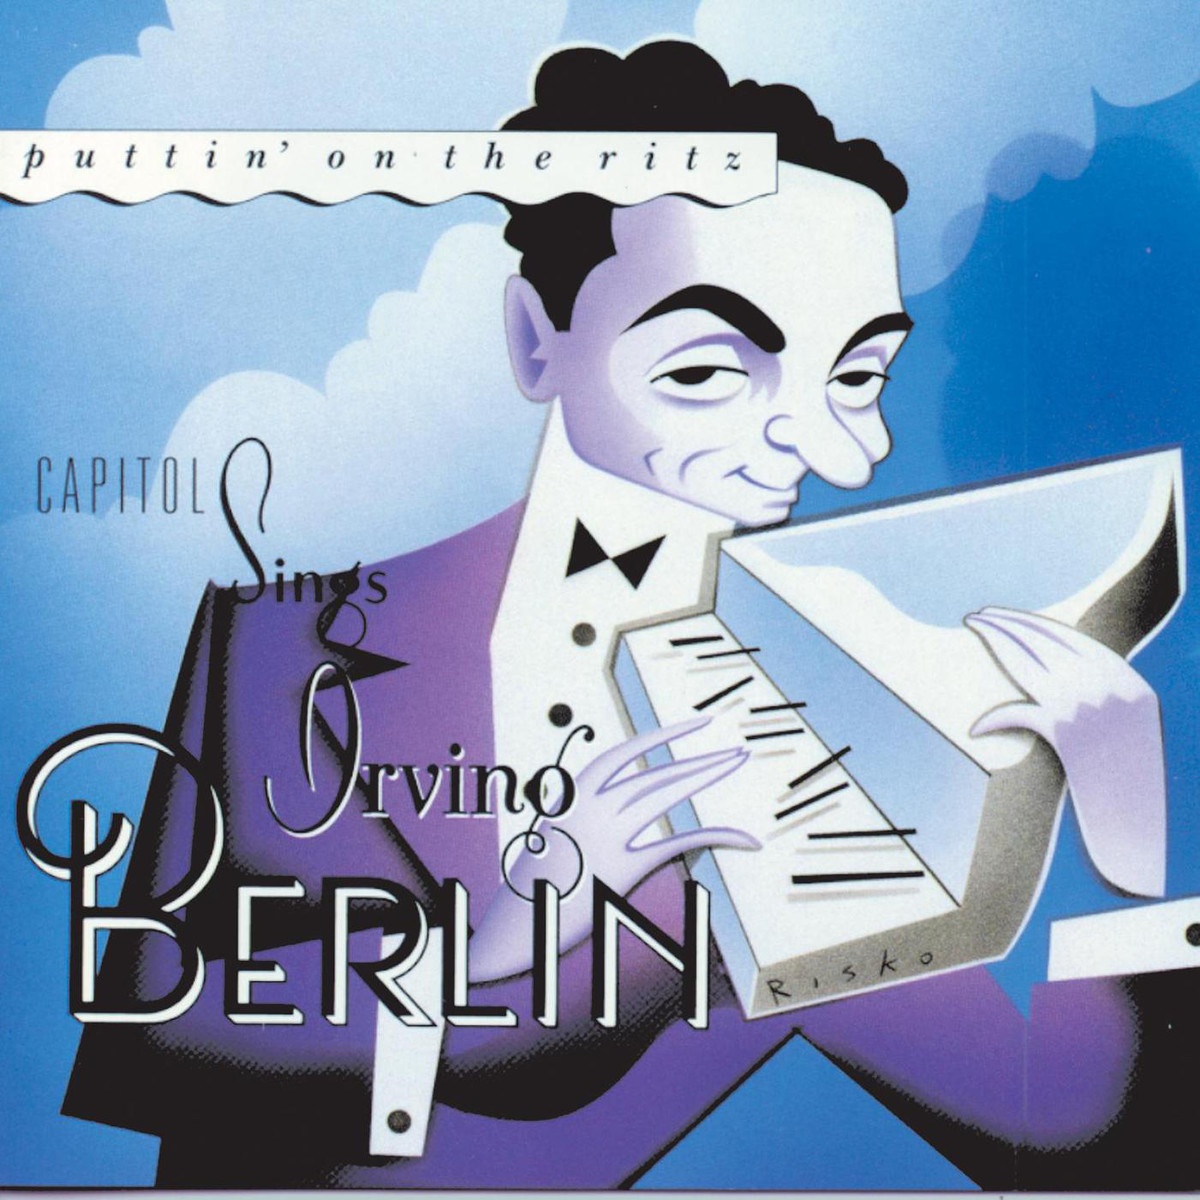 Puttin' On the Ritz: Capitol Sings Irving Berlin